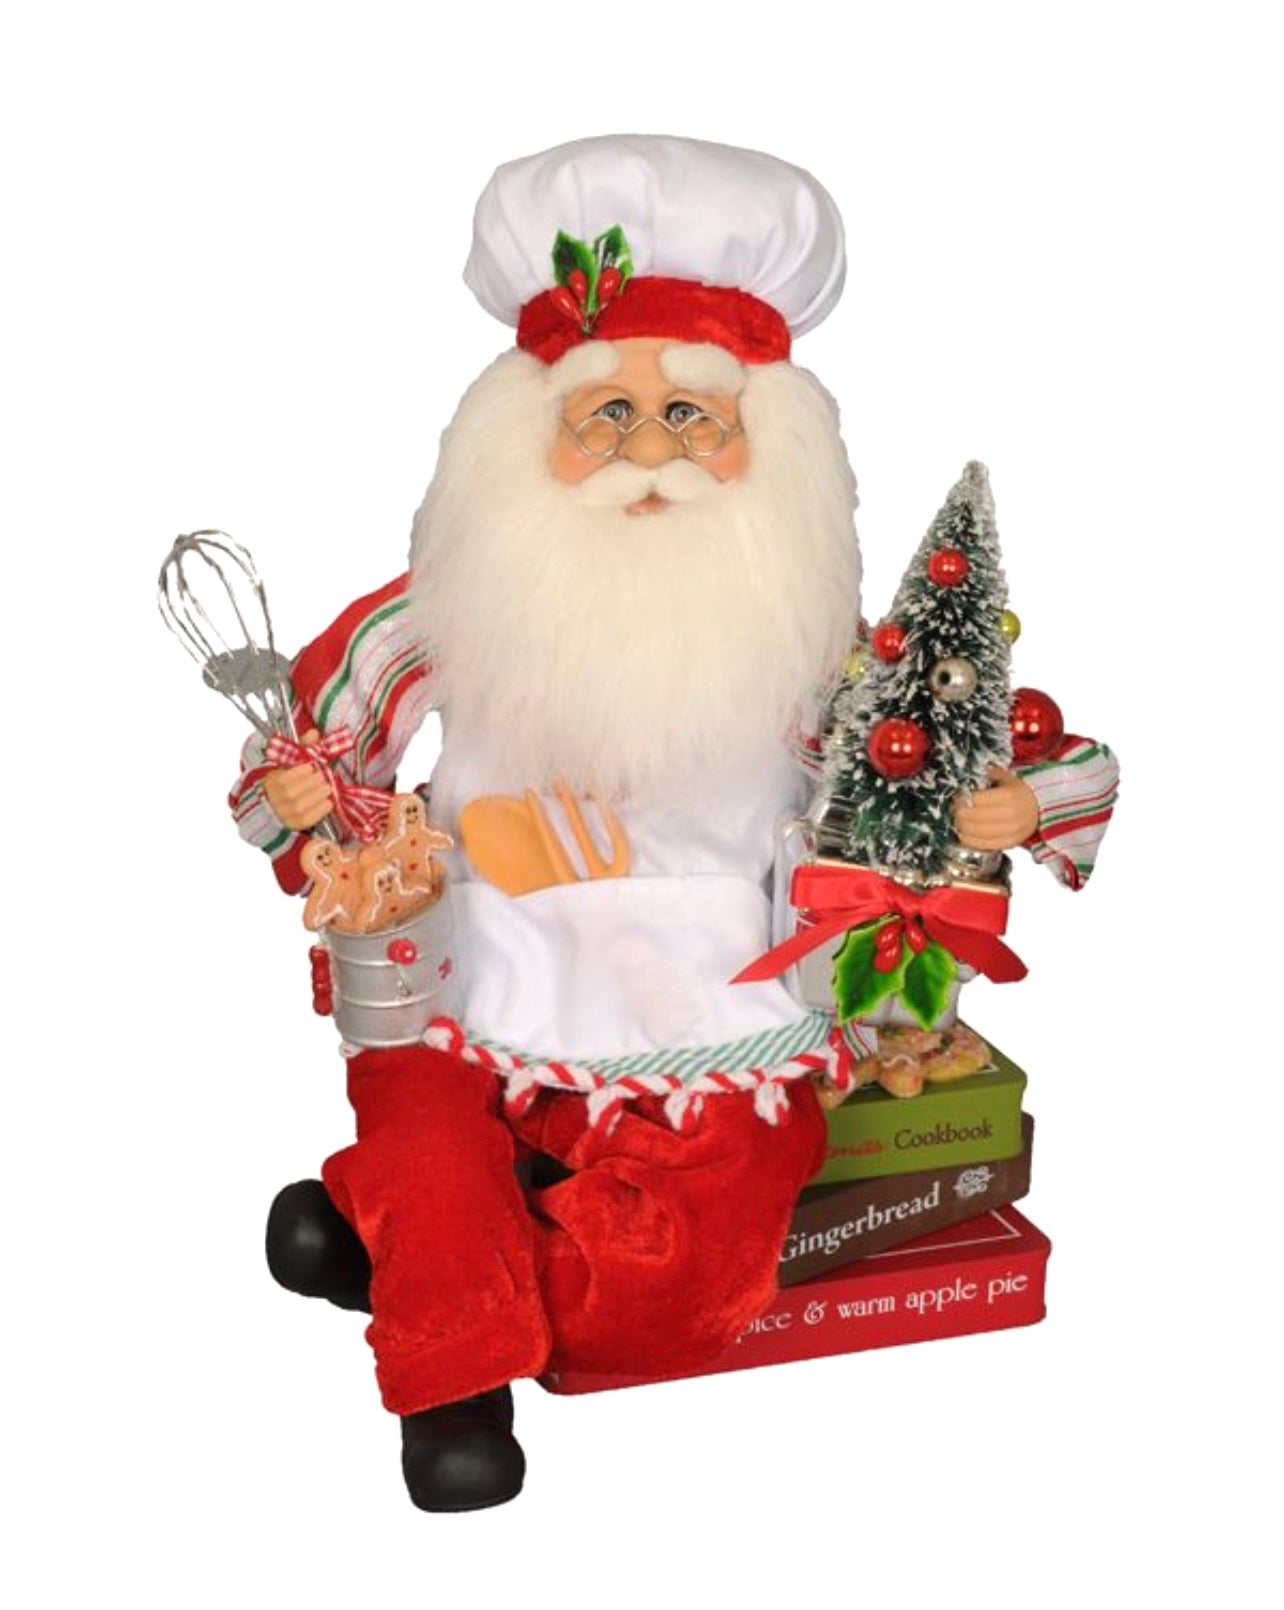 Baking Traditions Santa on Cook Books